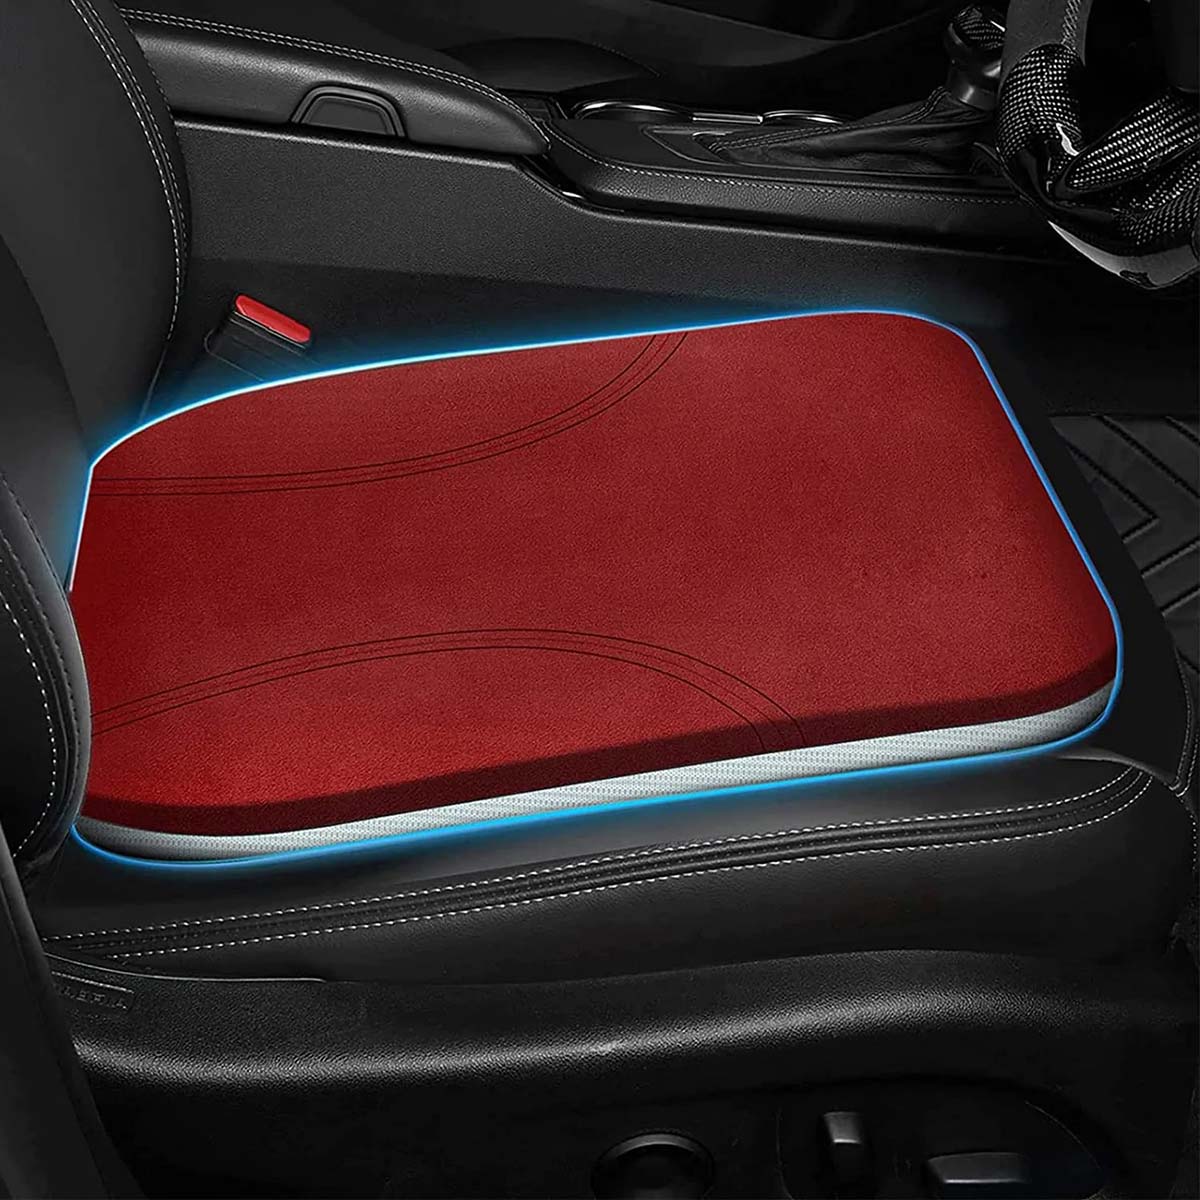 Car Seat Cushion, Custom Fit For Your Cars, Car Memory Foam Seat Cushion, Heightening Seat Cushion, Seat Cushion for Car and Office Chair MS19999